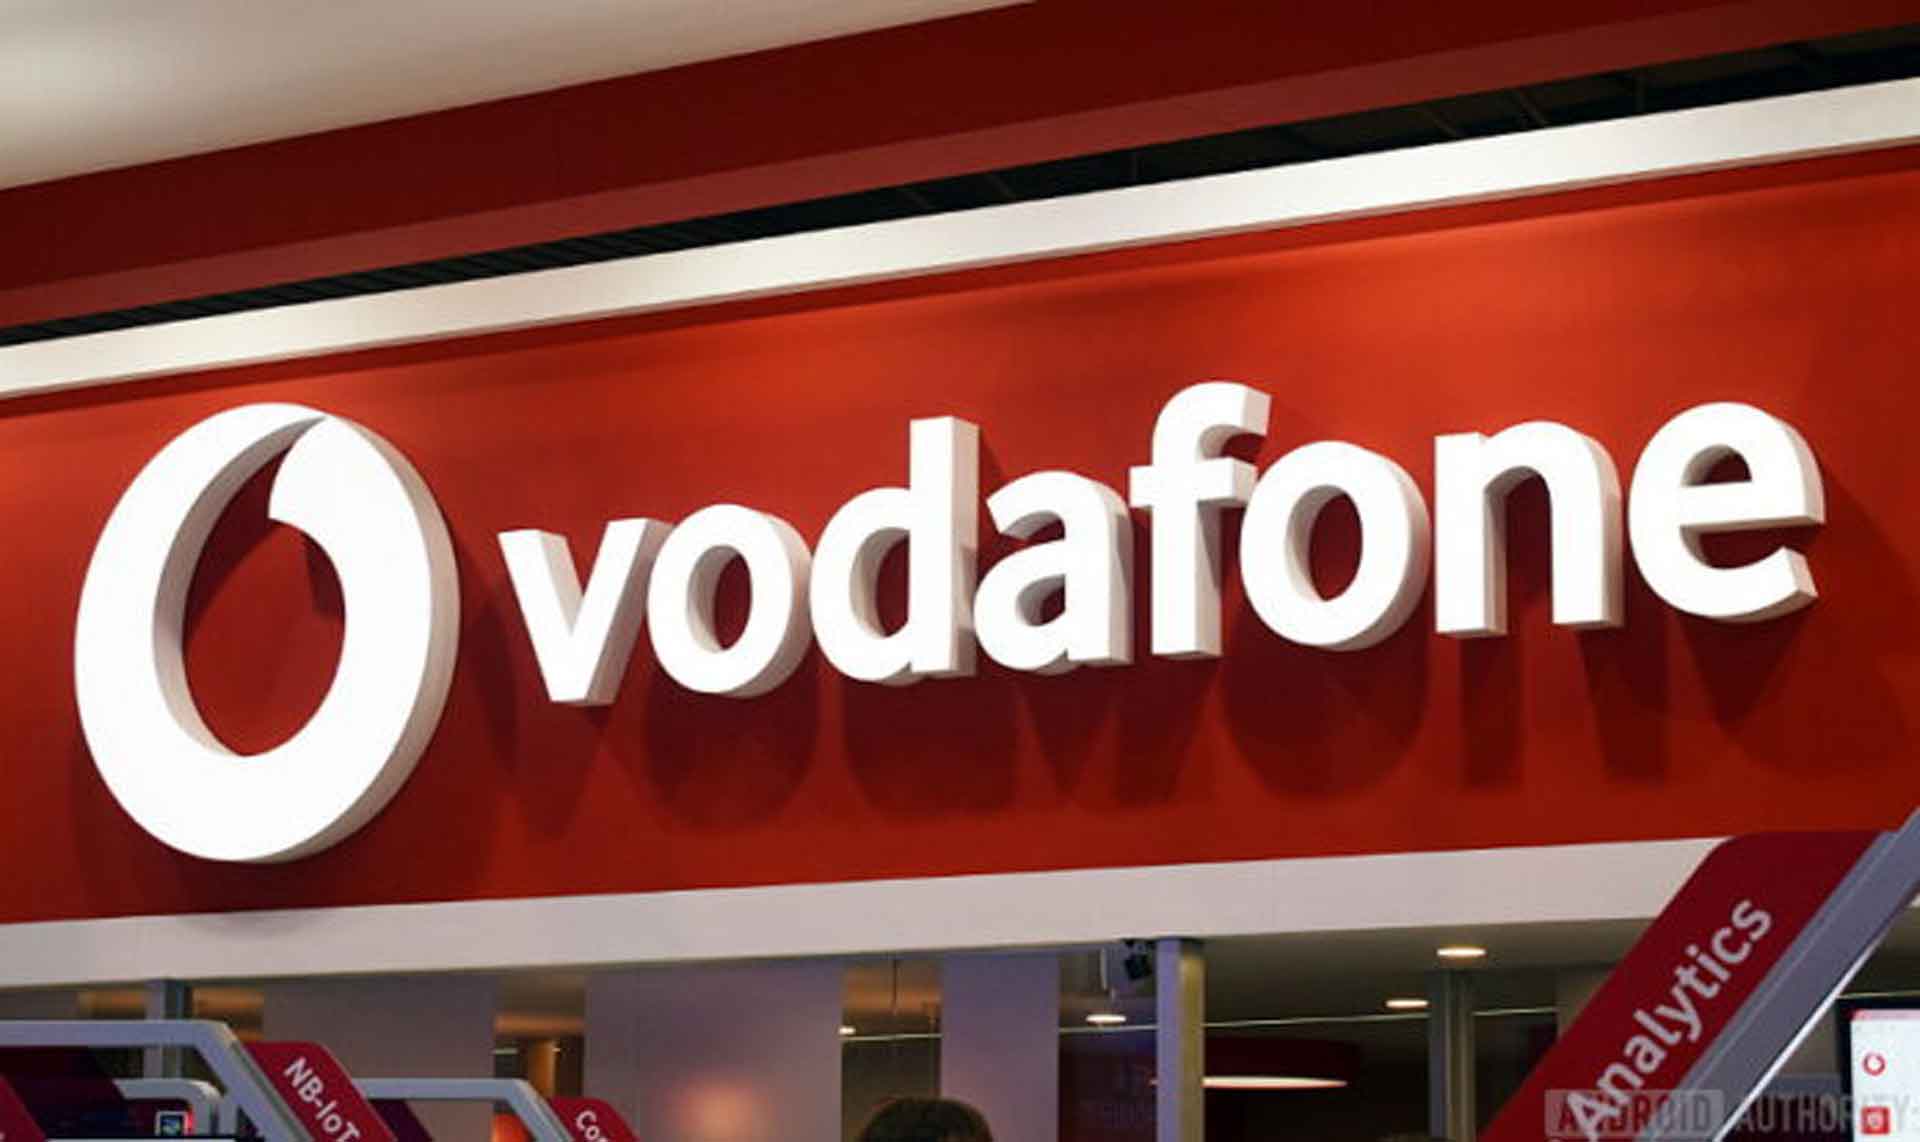 HOW TO CHECK YOUR VODAFONE NUMBER